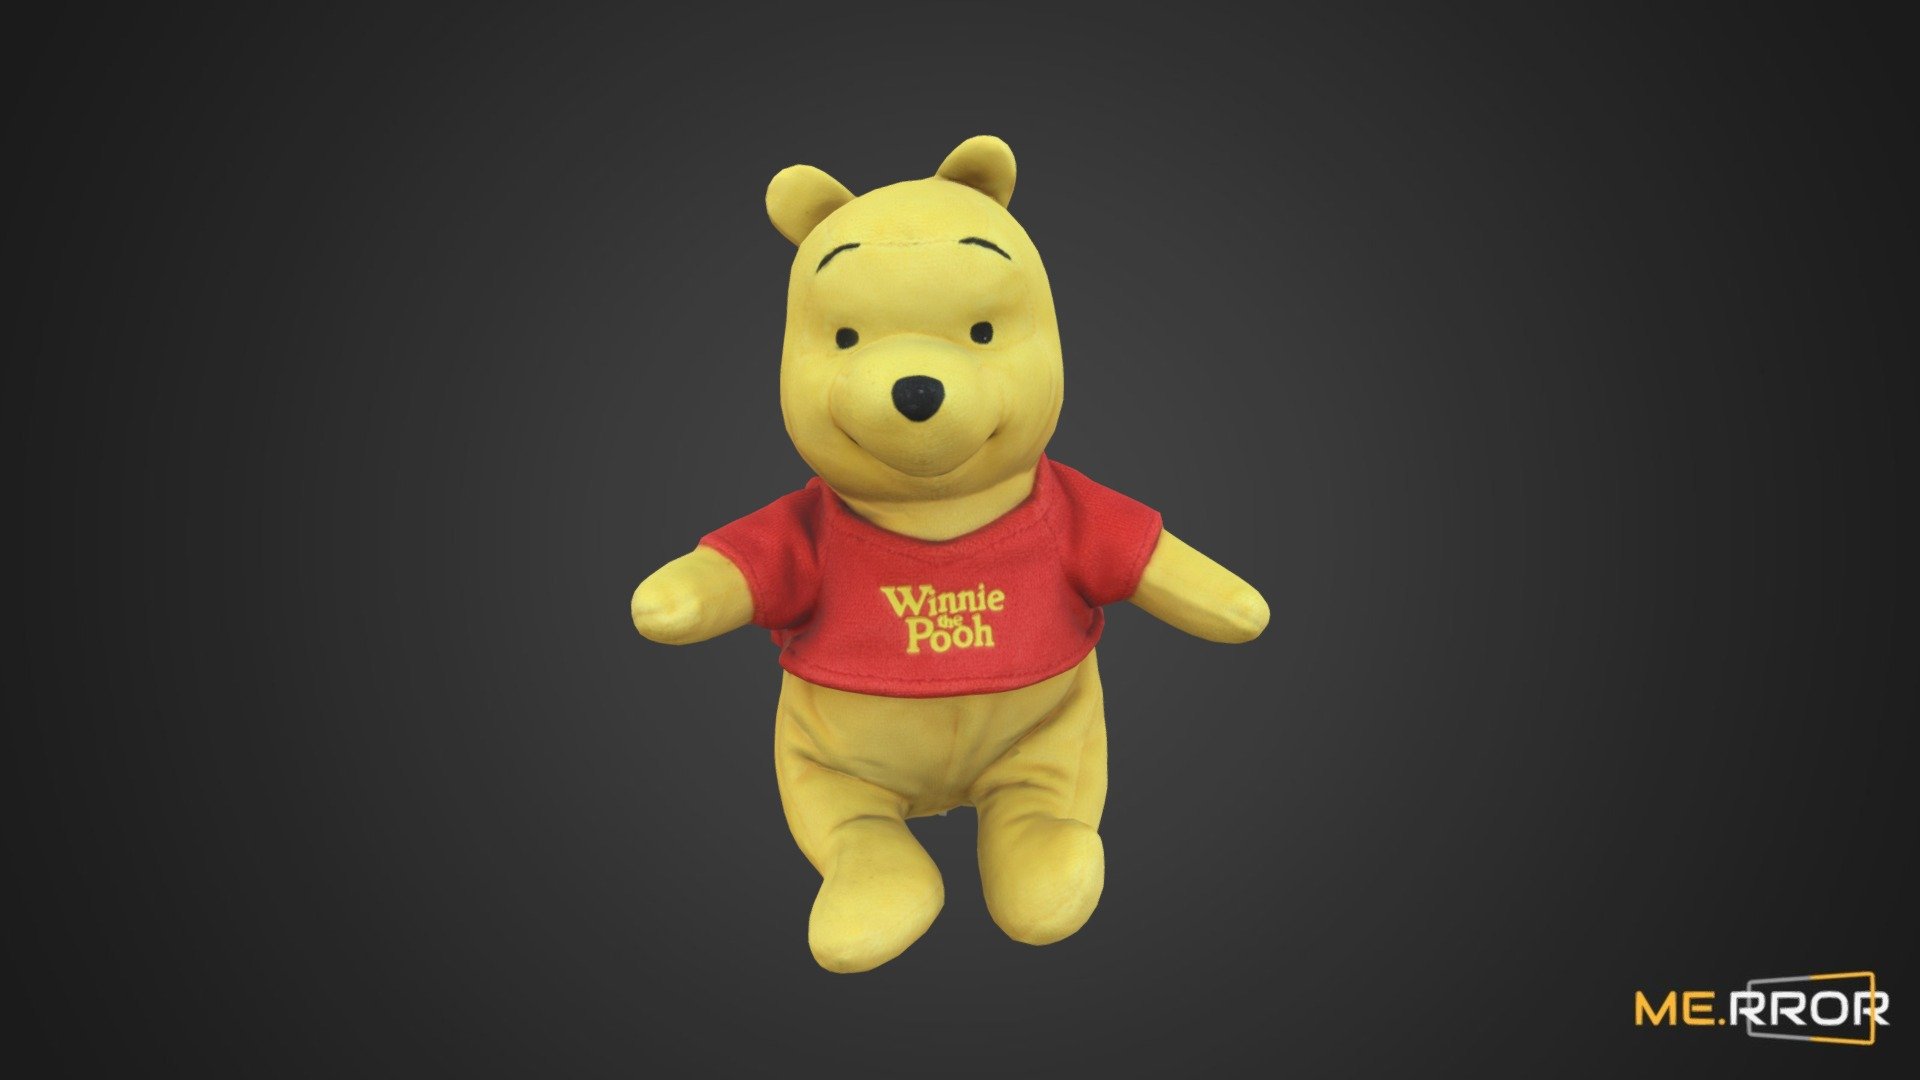 MERROR is a 3D Content PLATFORM which introduces various Asian assets to the 3D world


3DScanning #Photogrametry #ME.RROR - [Game-Ready] Winnie the Pooh Doll - Buy Royalty Free 3D model by ME.RROR (@merror) 3d model